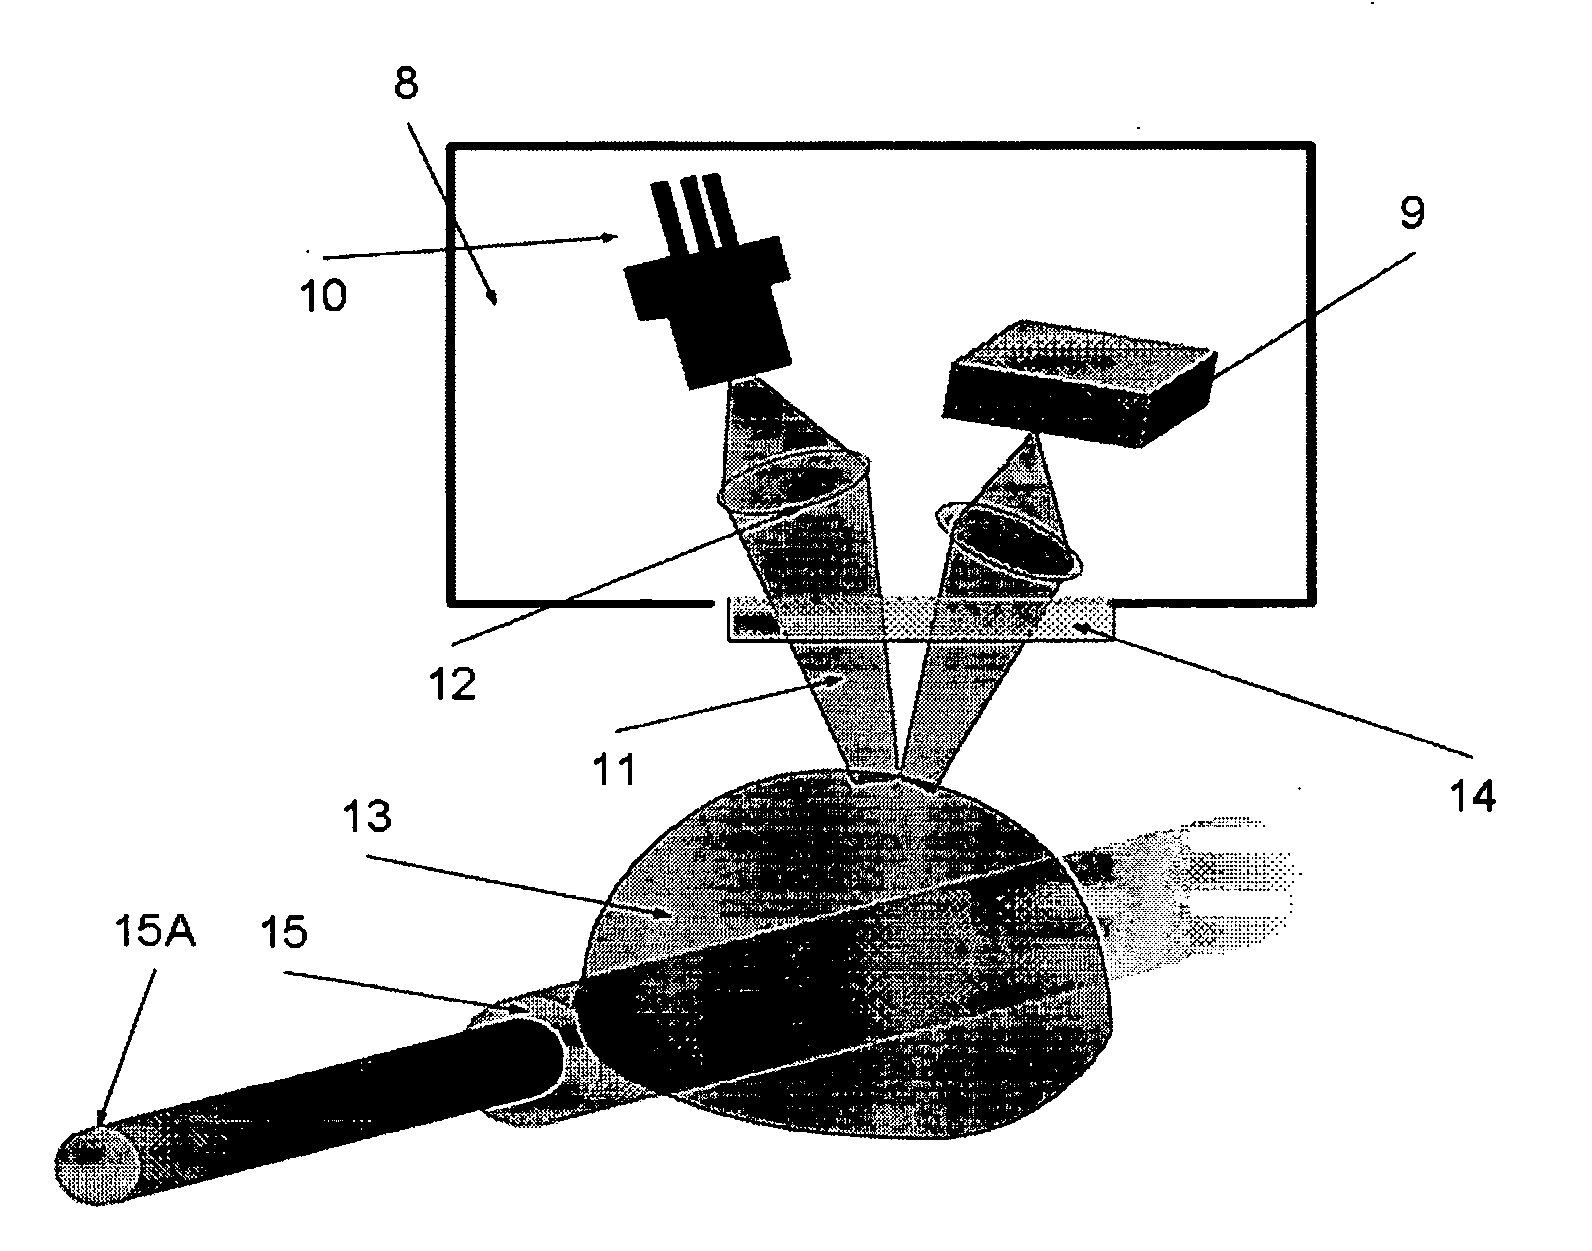 Medical simulation device with motion detector